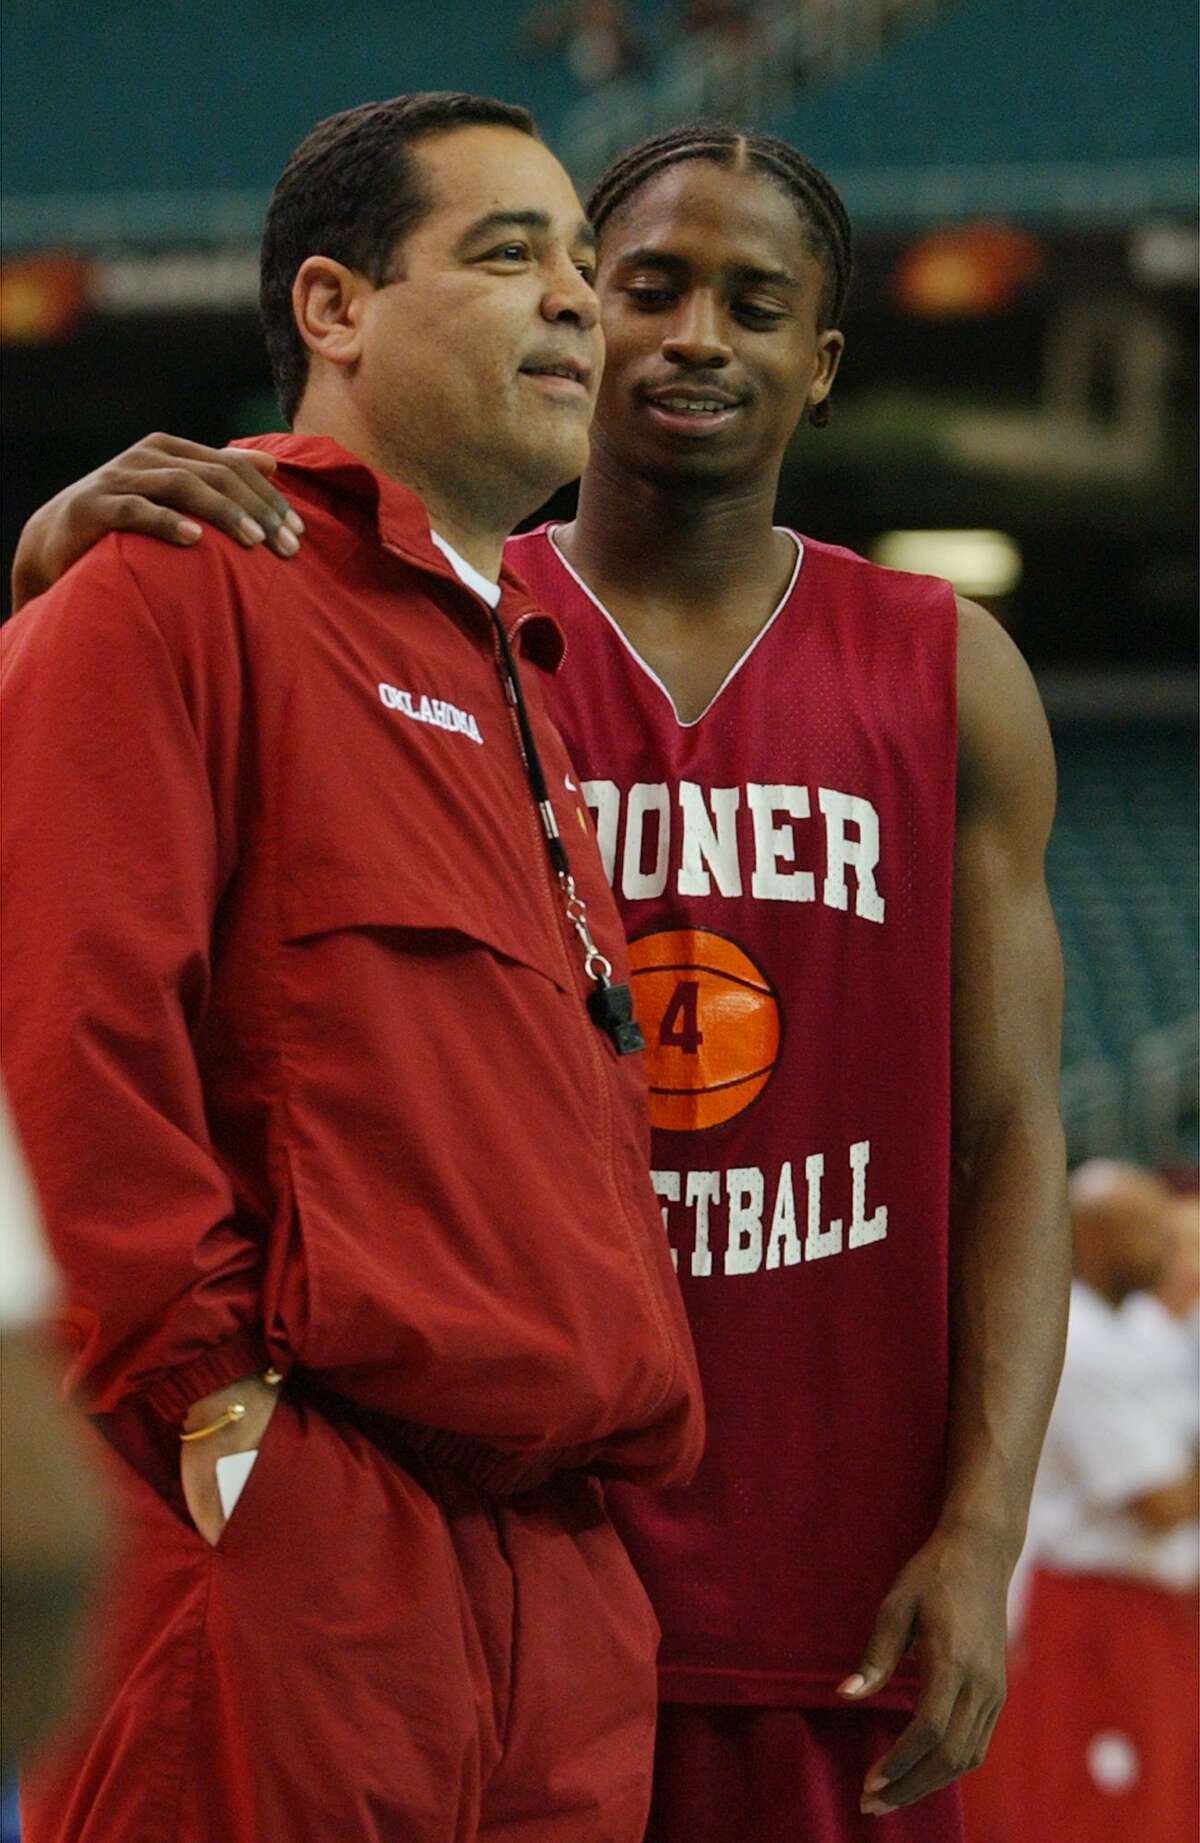 KRT SPORTS STORY SLUGGED: FINALFOUR KRT PHOTOGRAPH BY PATRICK SCHNEIDER/CHARLOTTE OBSERVER (March 26) ATLANTA, GA -  Quanna White,  will now serve as an assistant coach to head coach Kelvin Sampson, after playing for him as a Sooner.